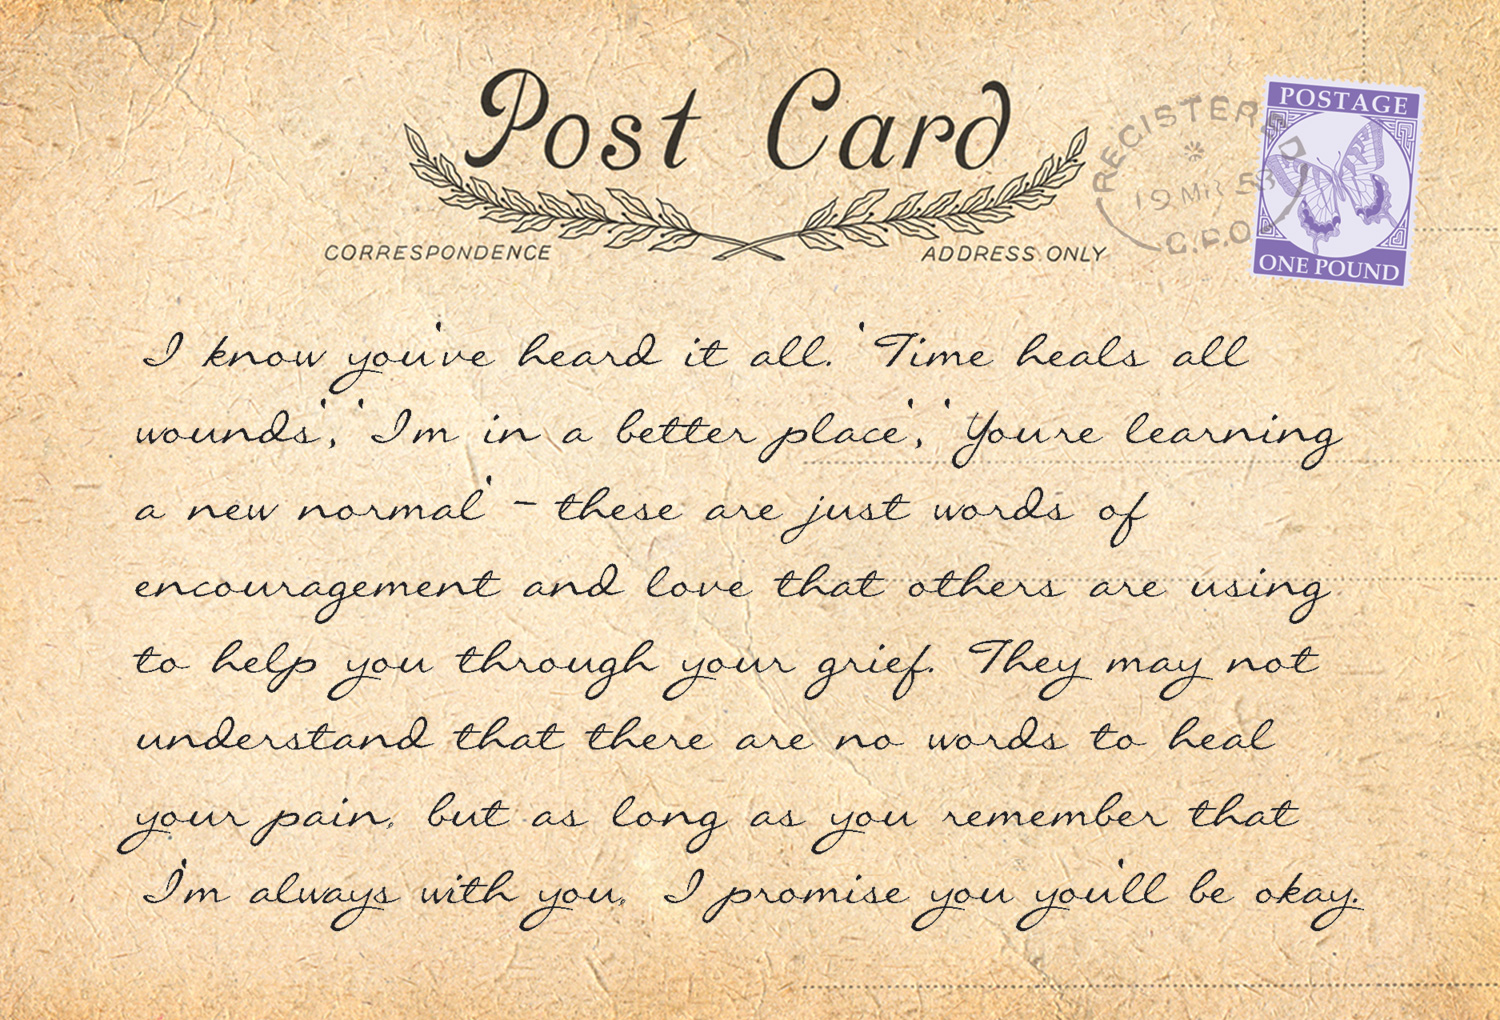 POSTCARDS FROM HEAVEN 2 - back 27